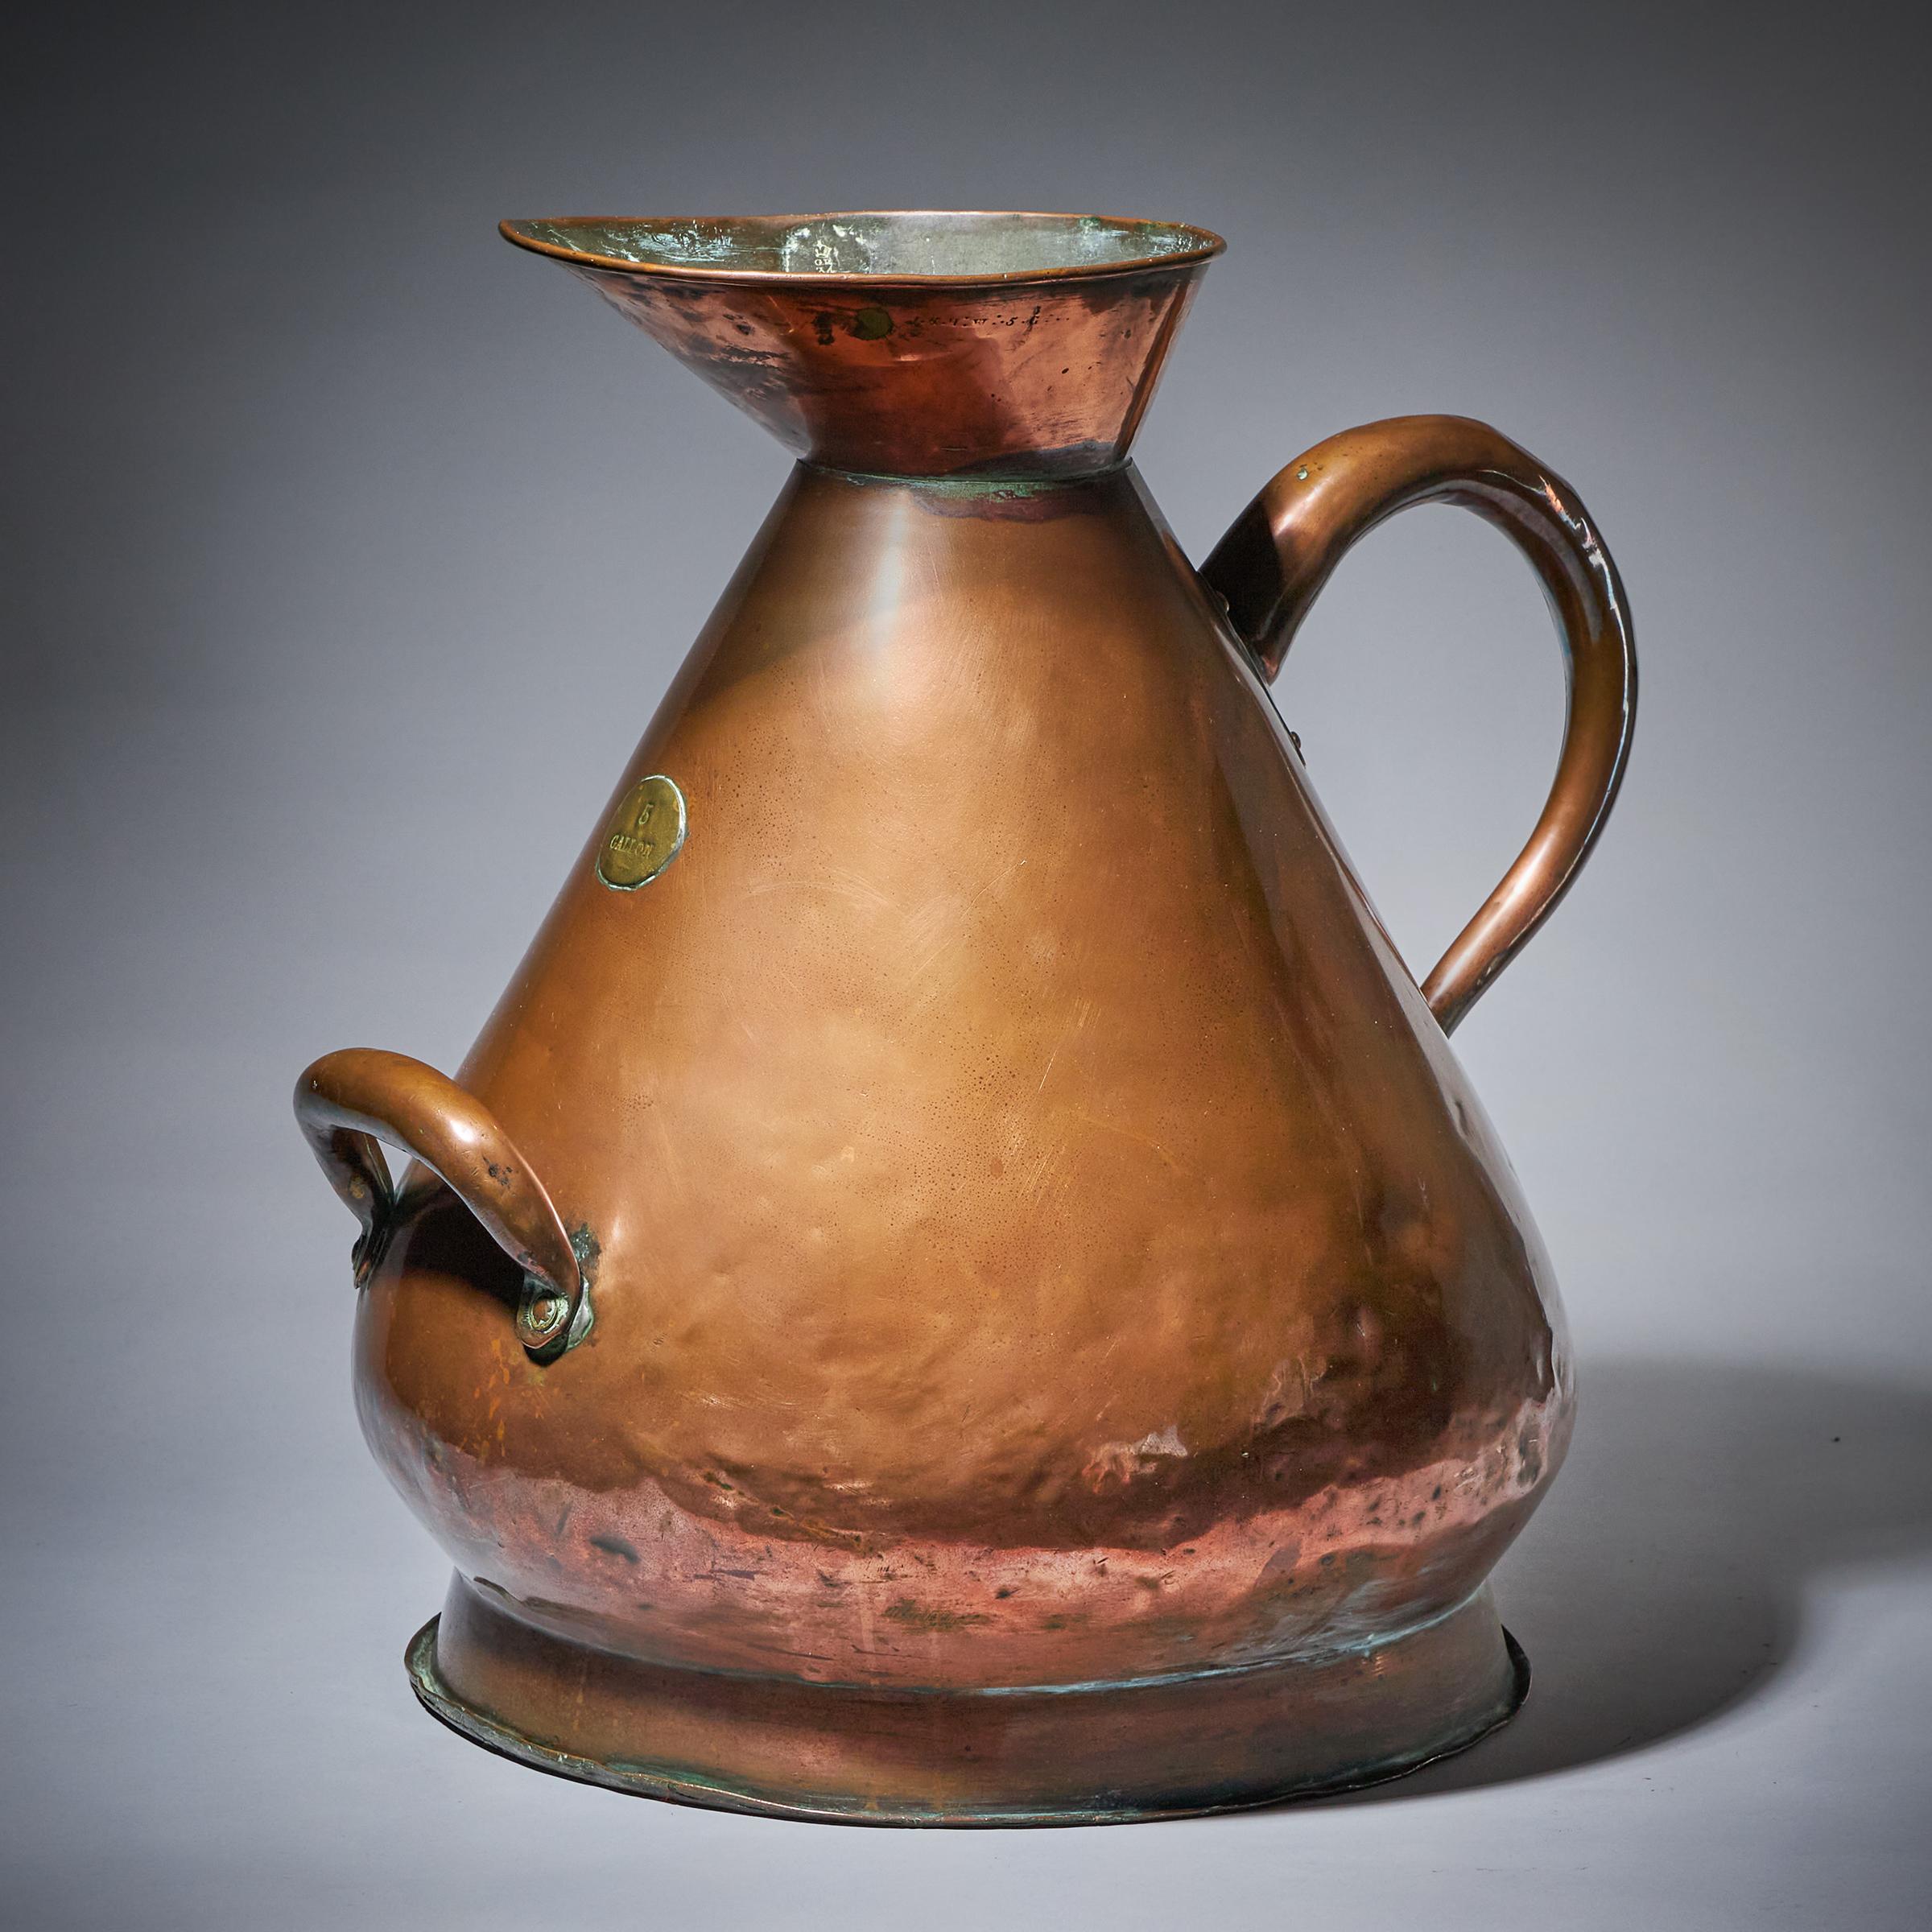 A fabulous and large scale country house 5 gallon hammered copper milk jug or pitcher. 

Due to the large scale, this jug/pitcher would make a fabulous centrepiece on a dresser/console table or simply placed on the floor and adorned.

Provenance